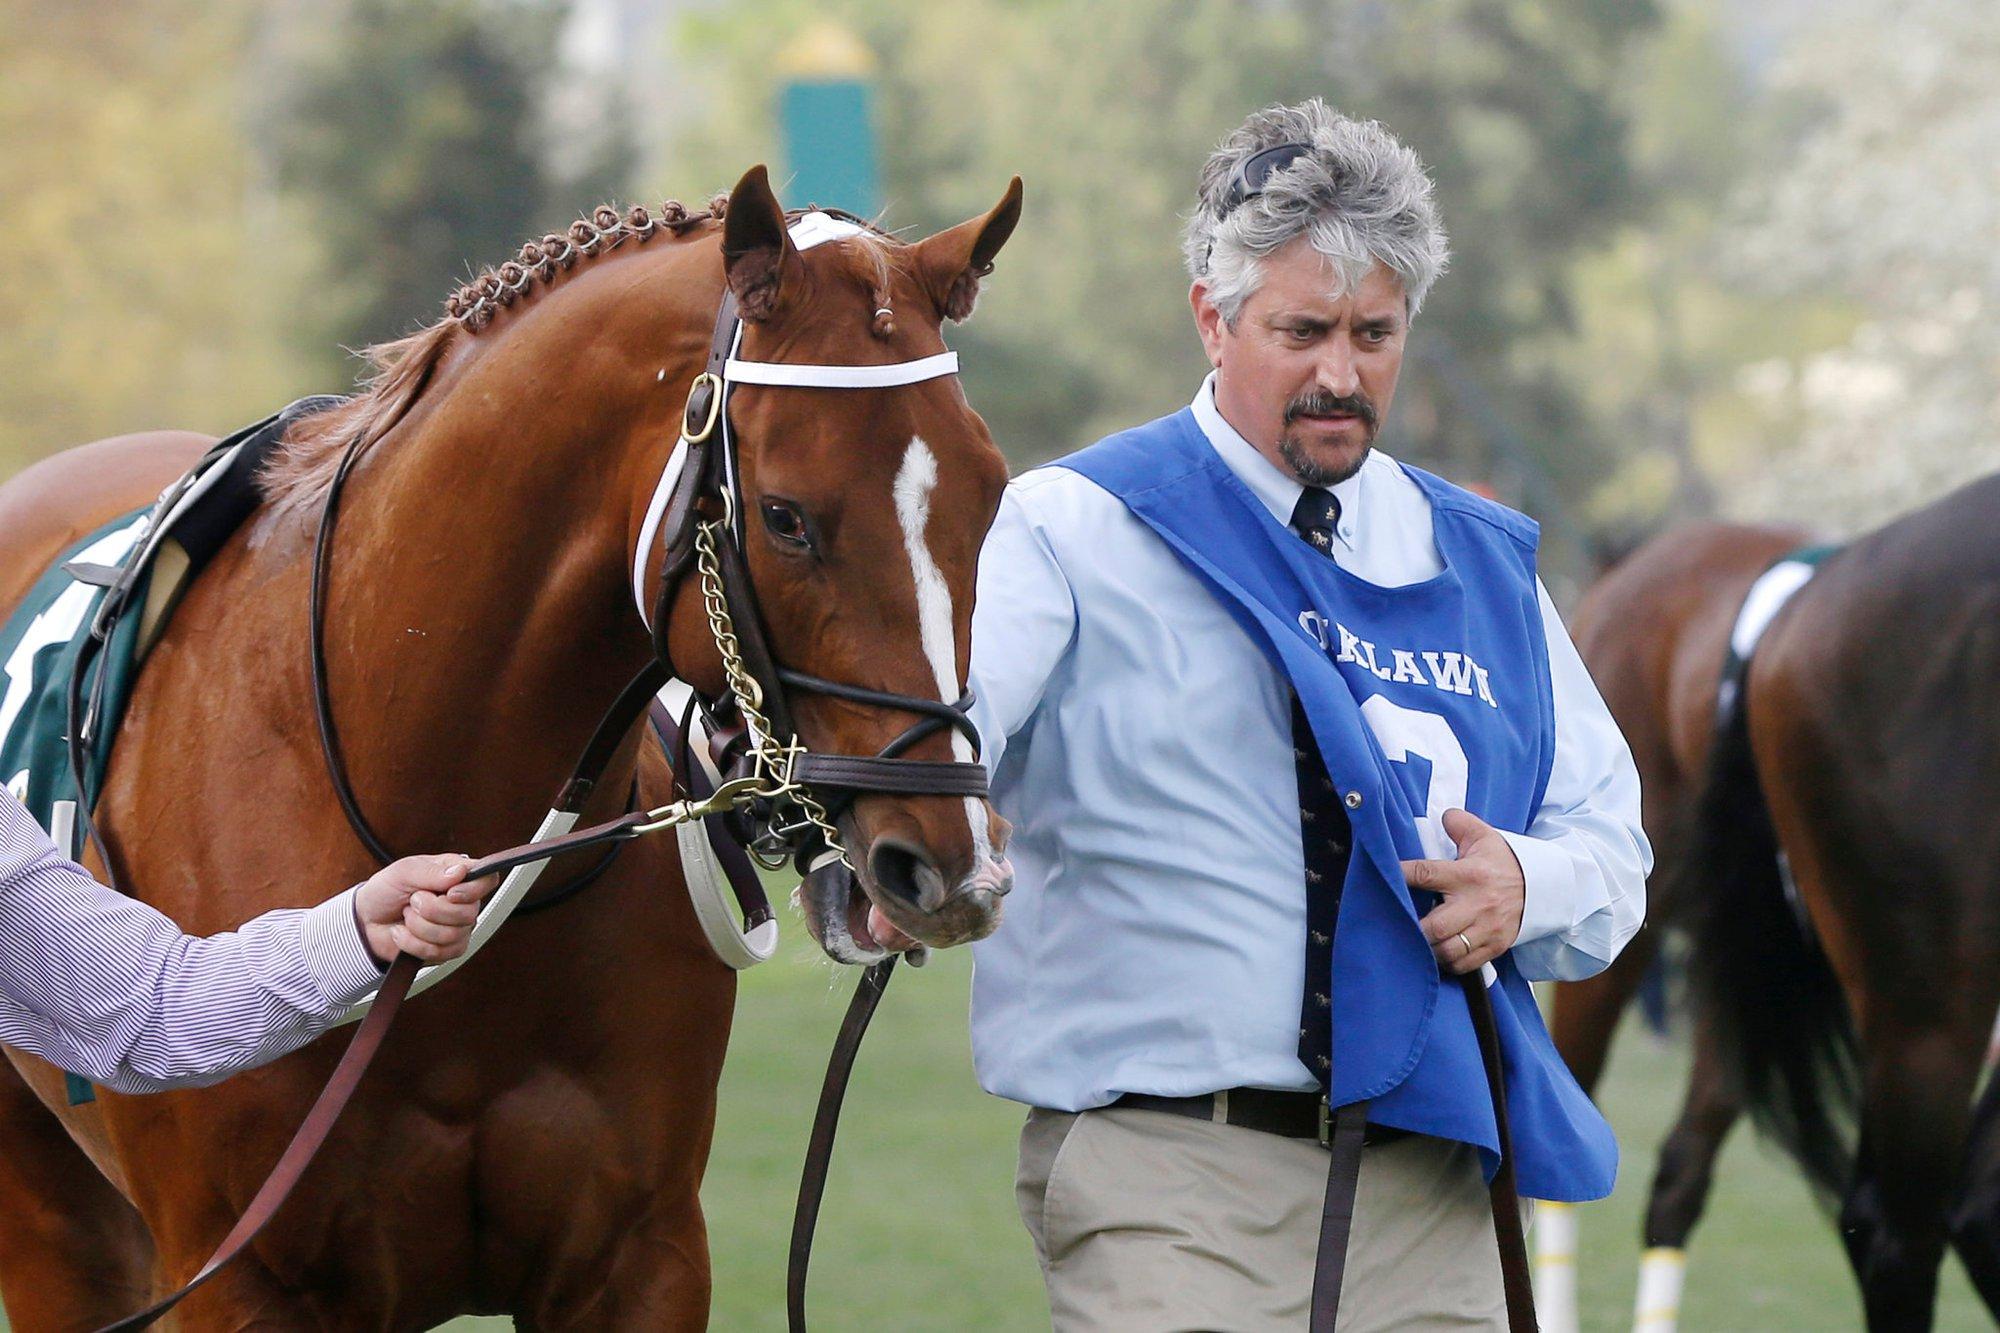 Asmussen could become the winningest trainer of all time this week at Saratoga